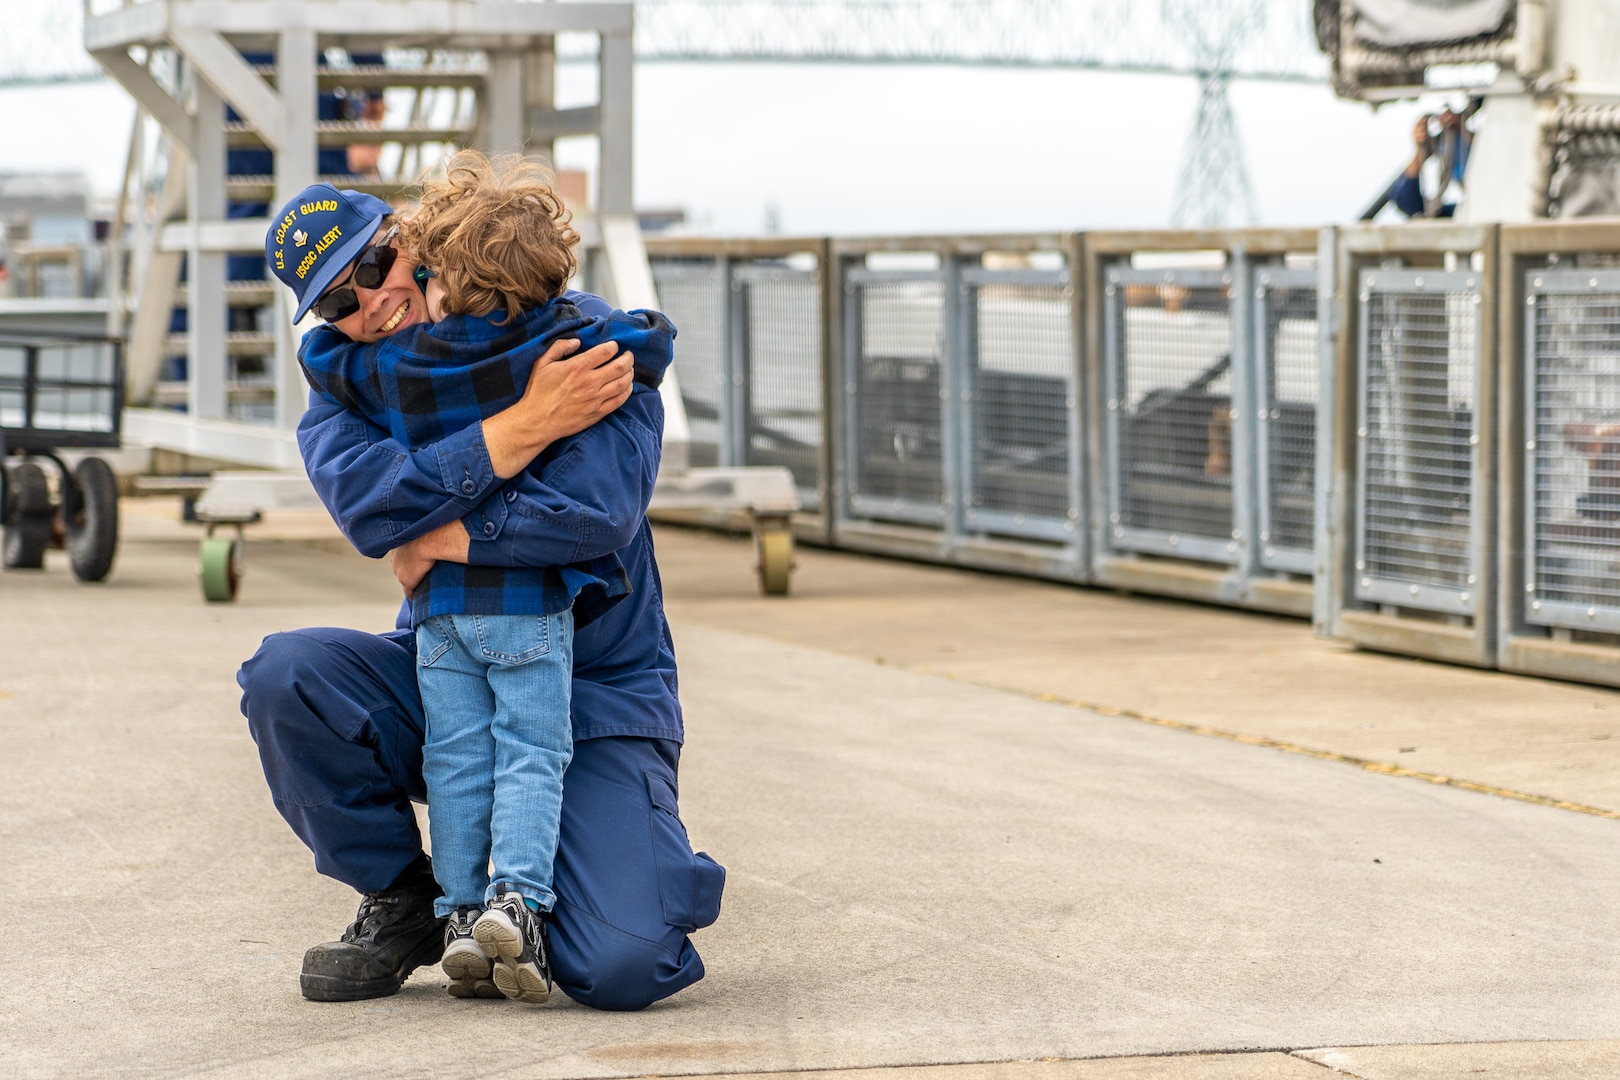 The U.S. Coast Guard Cutter Alert (WMEC 630) and crew returned to homeport in Astoria, Oregon, after a 61-day counternarcotics patrol in the Eastern Pacific, June 16, 2023.